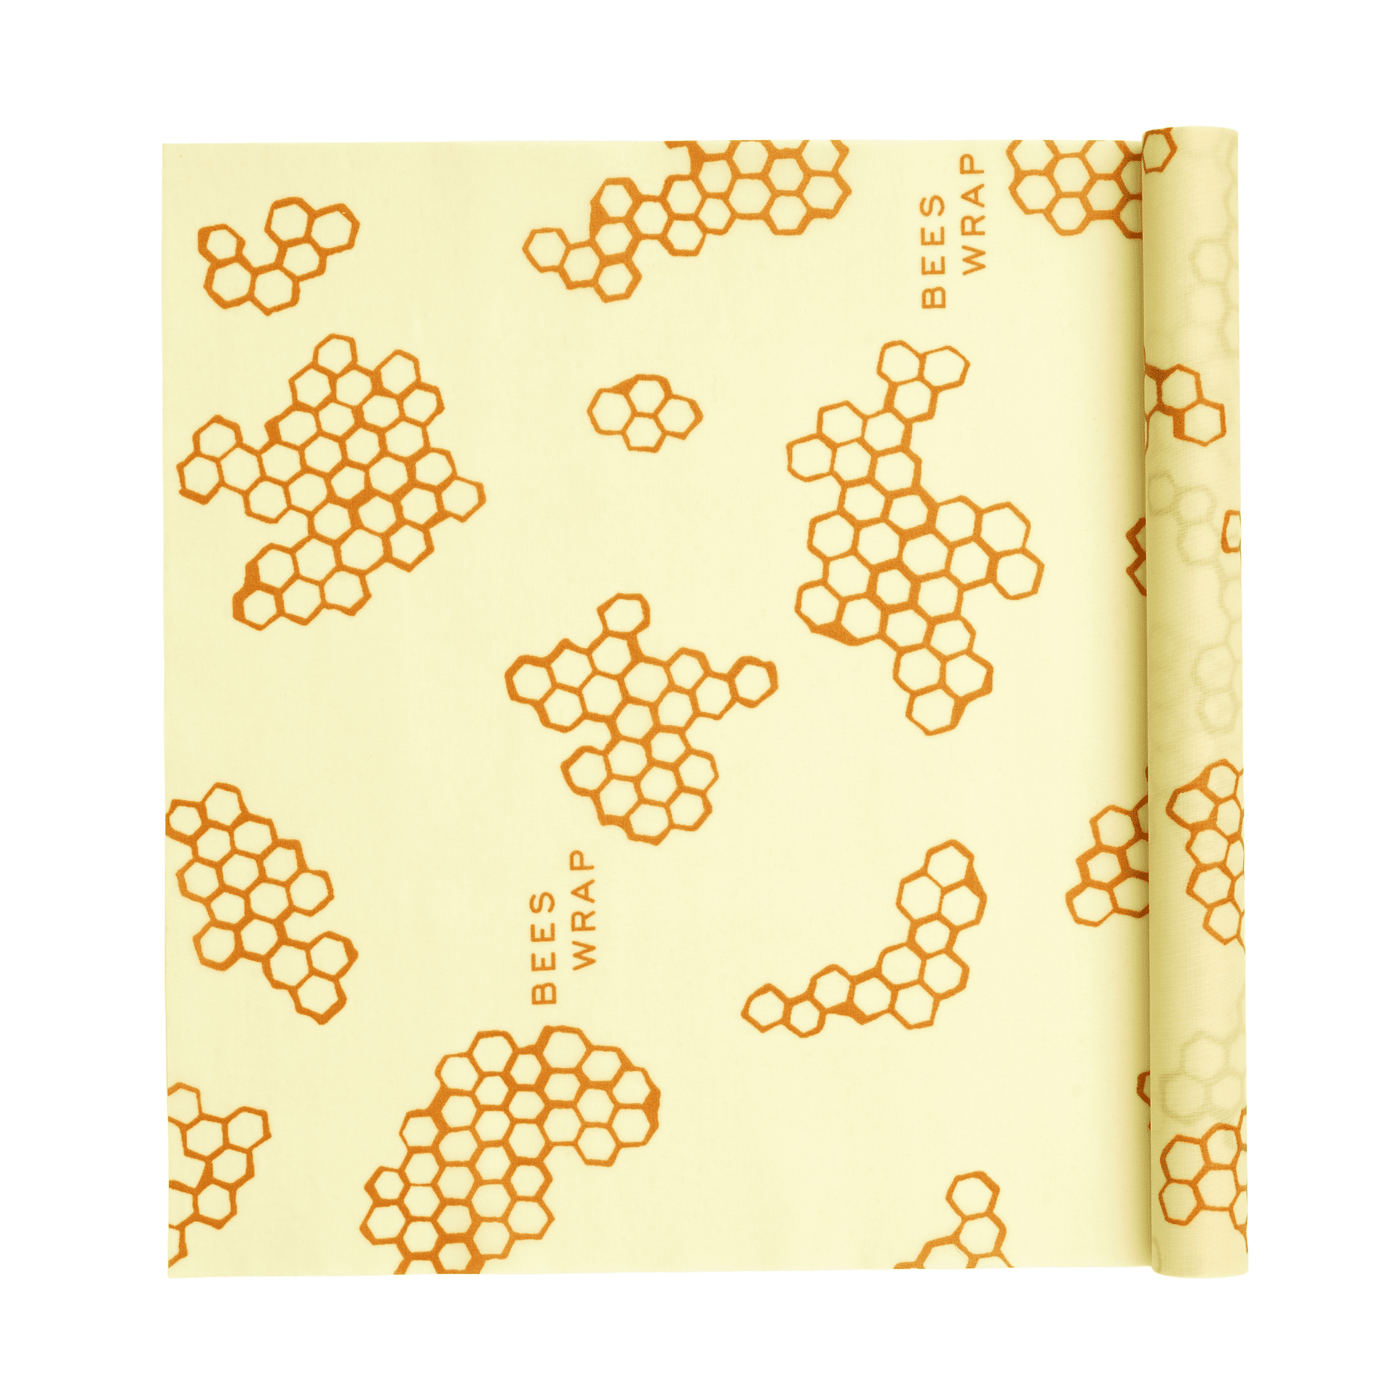 Honeycomb Wrapping Paper, Yellow Wrapping Paper, Cute Wrapping